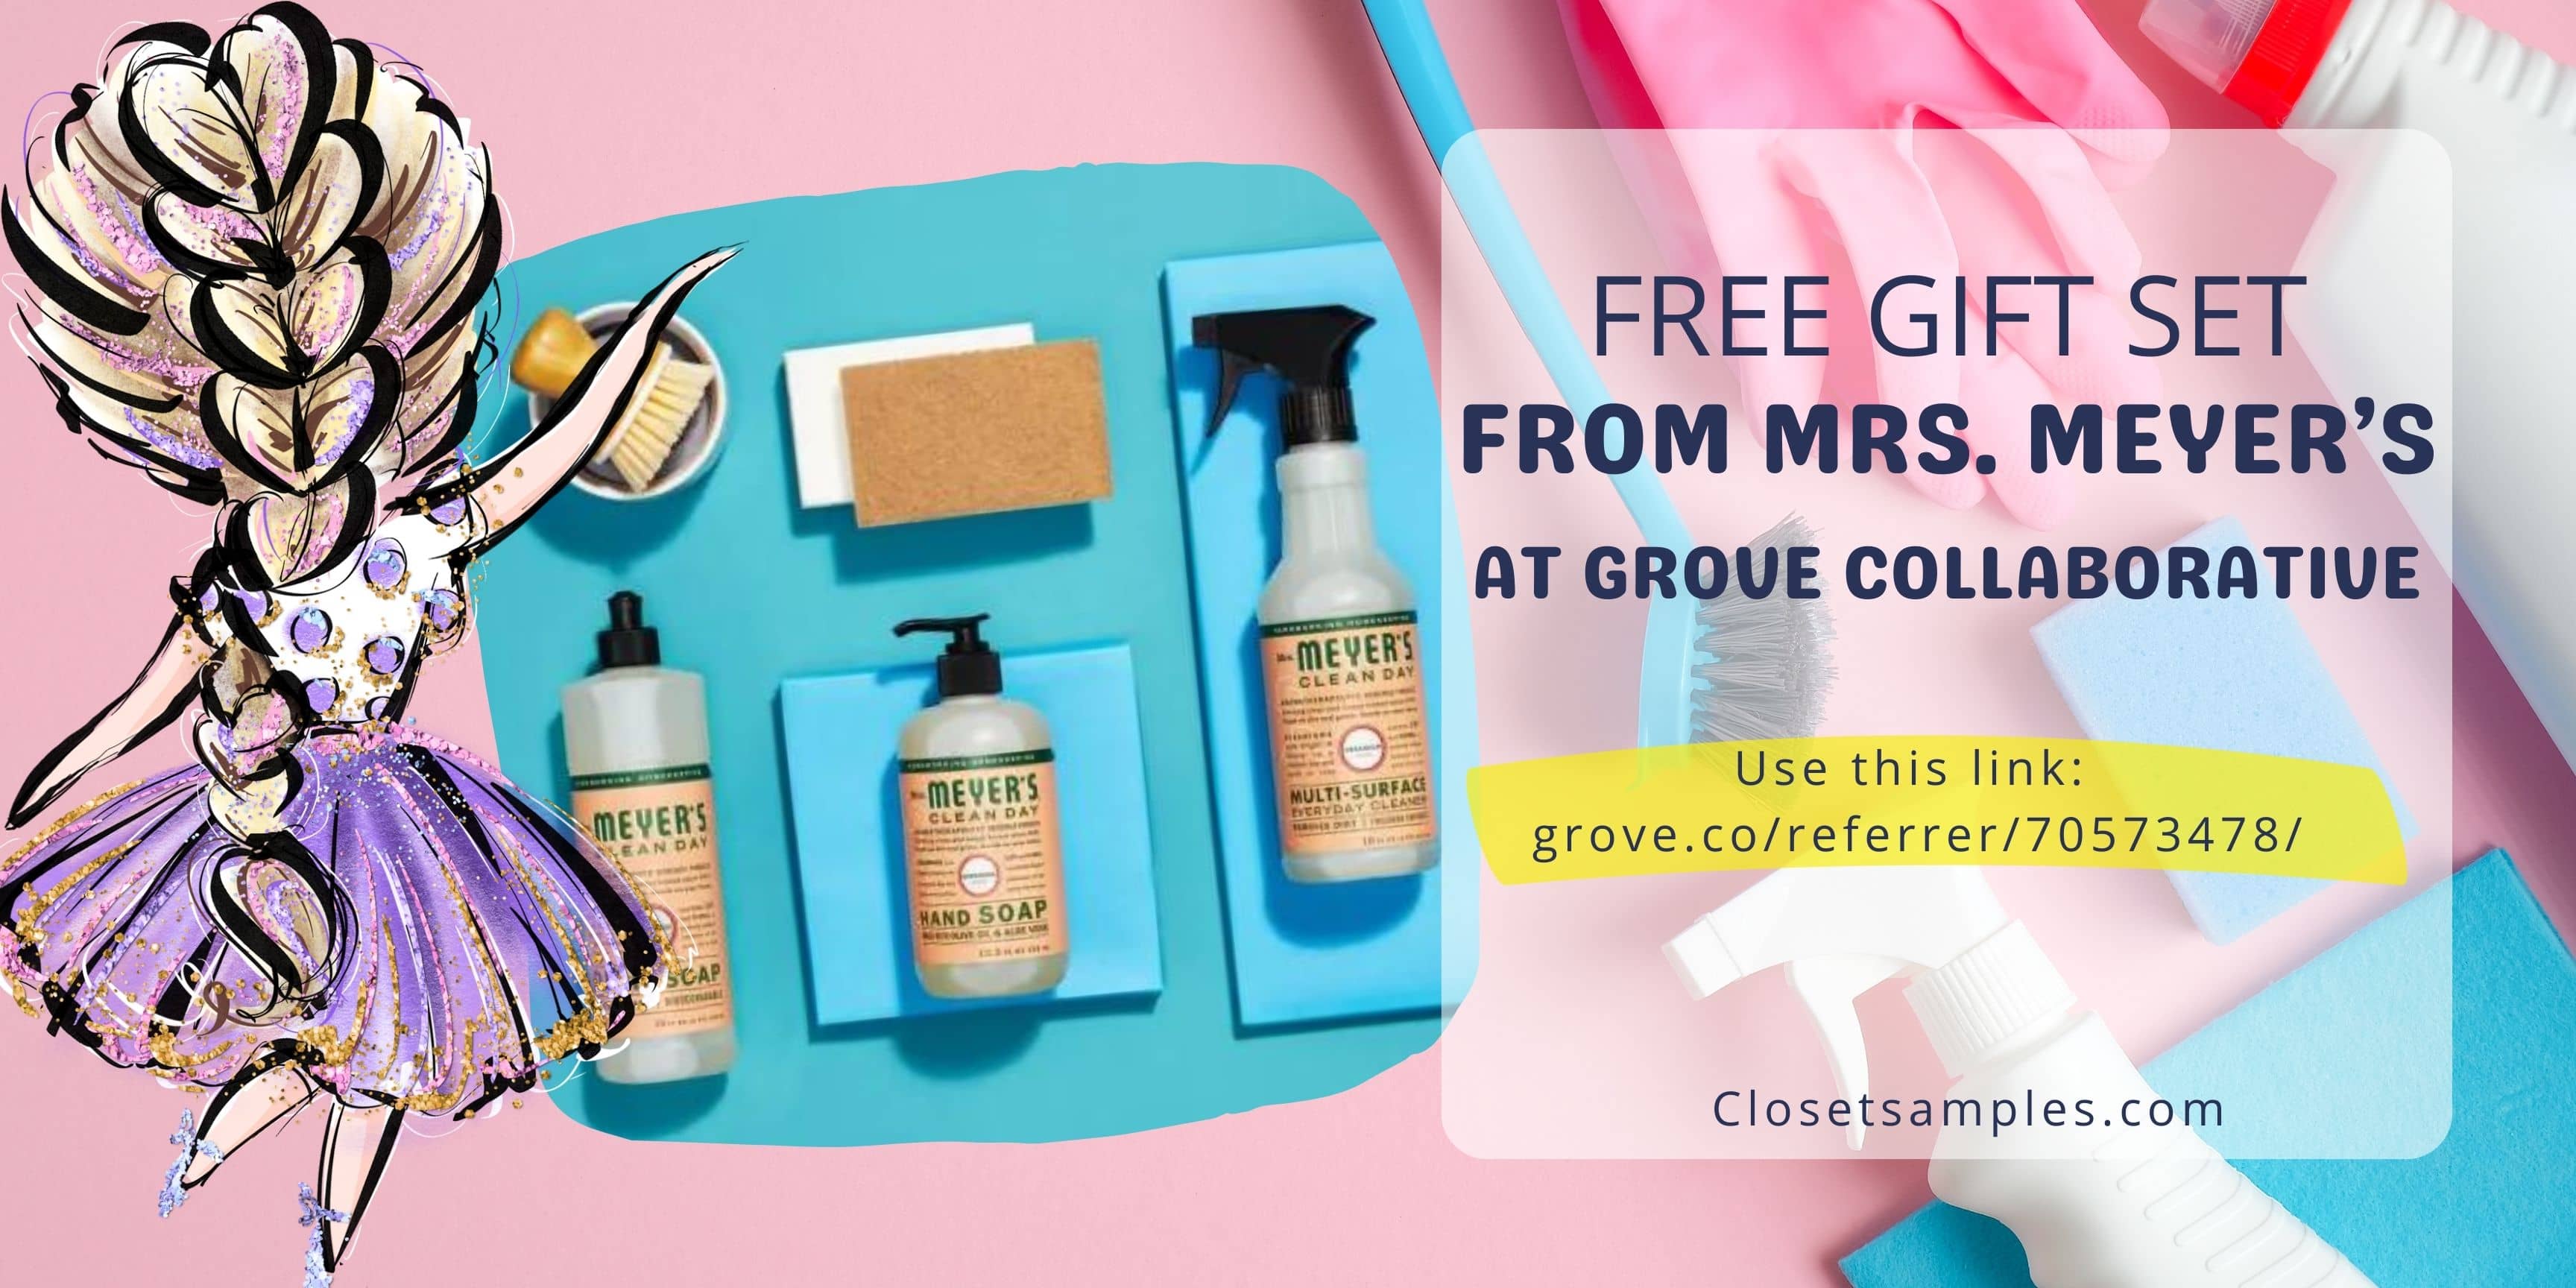 FREE Gift Set from Mrs. Meyer’s at Grove Collaborative for NEW Accounts!